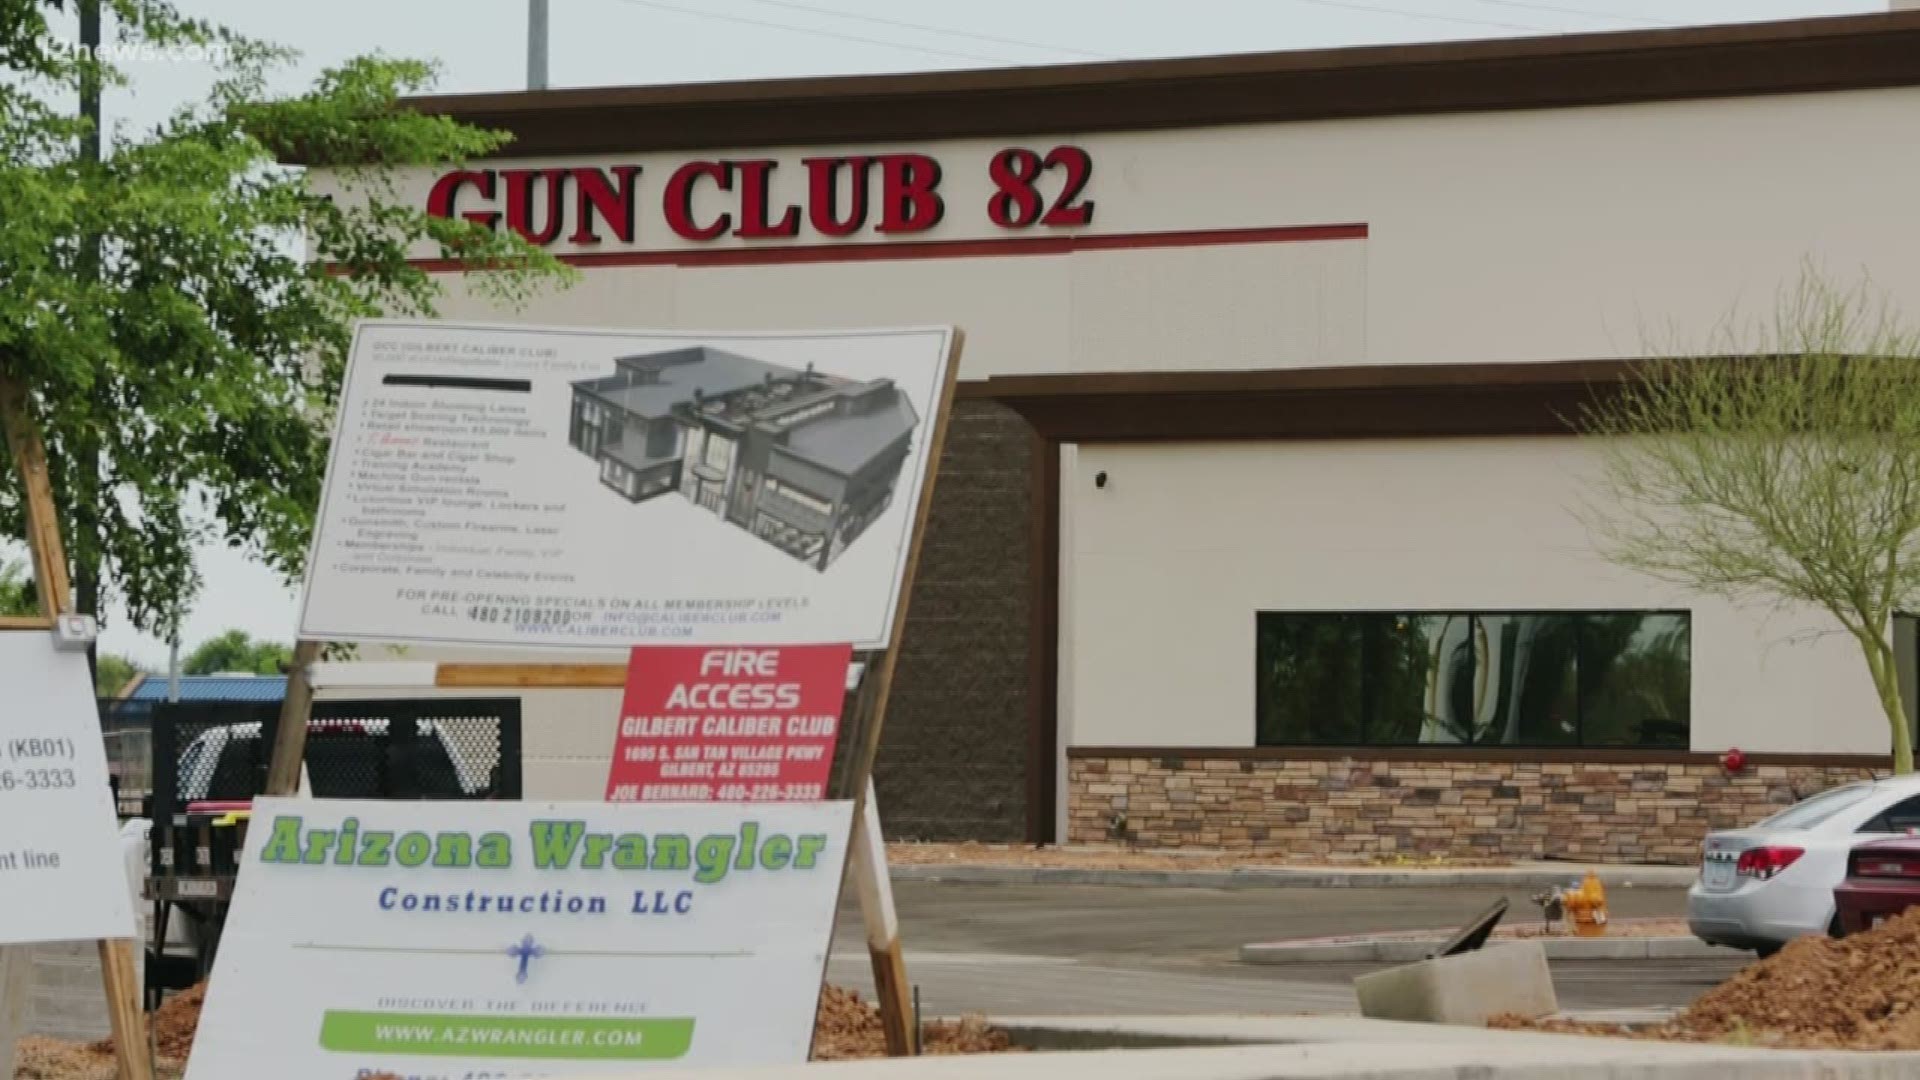 Club 82 was supposed to open in Gilbert as a shooting range with a bar, where you drink after you shoot. Contractors who helped build the club say they are owed nearly half a million dollars for their work. The Maricopa County Recorders Office has 11 liens recorded against Club 82 and the general contractor, Arizona Wrangler, hired to finish the job.